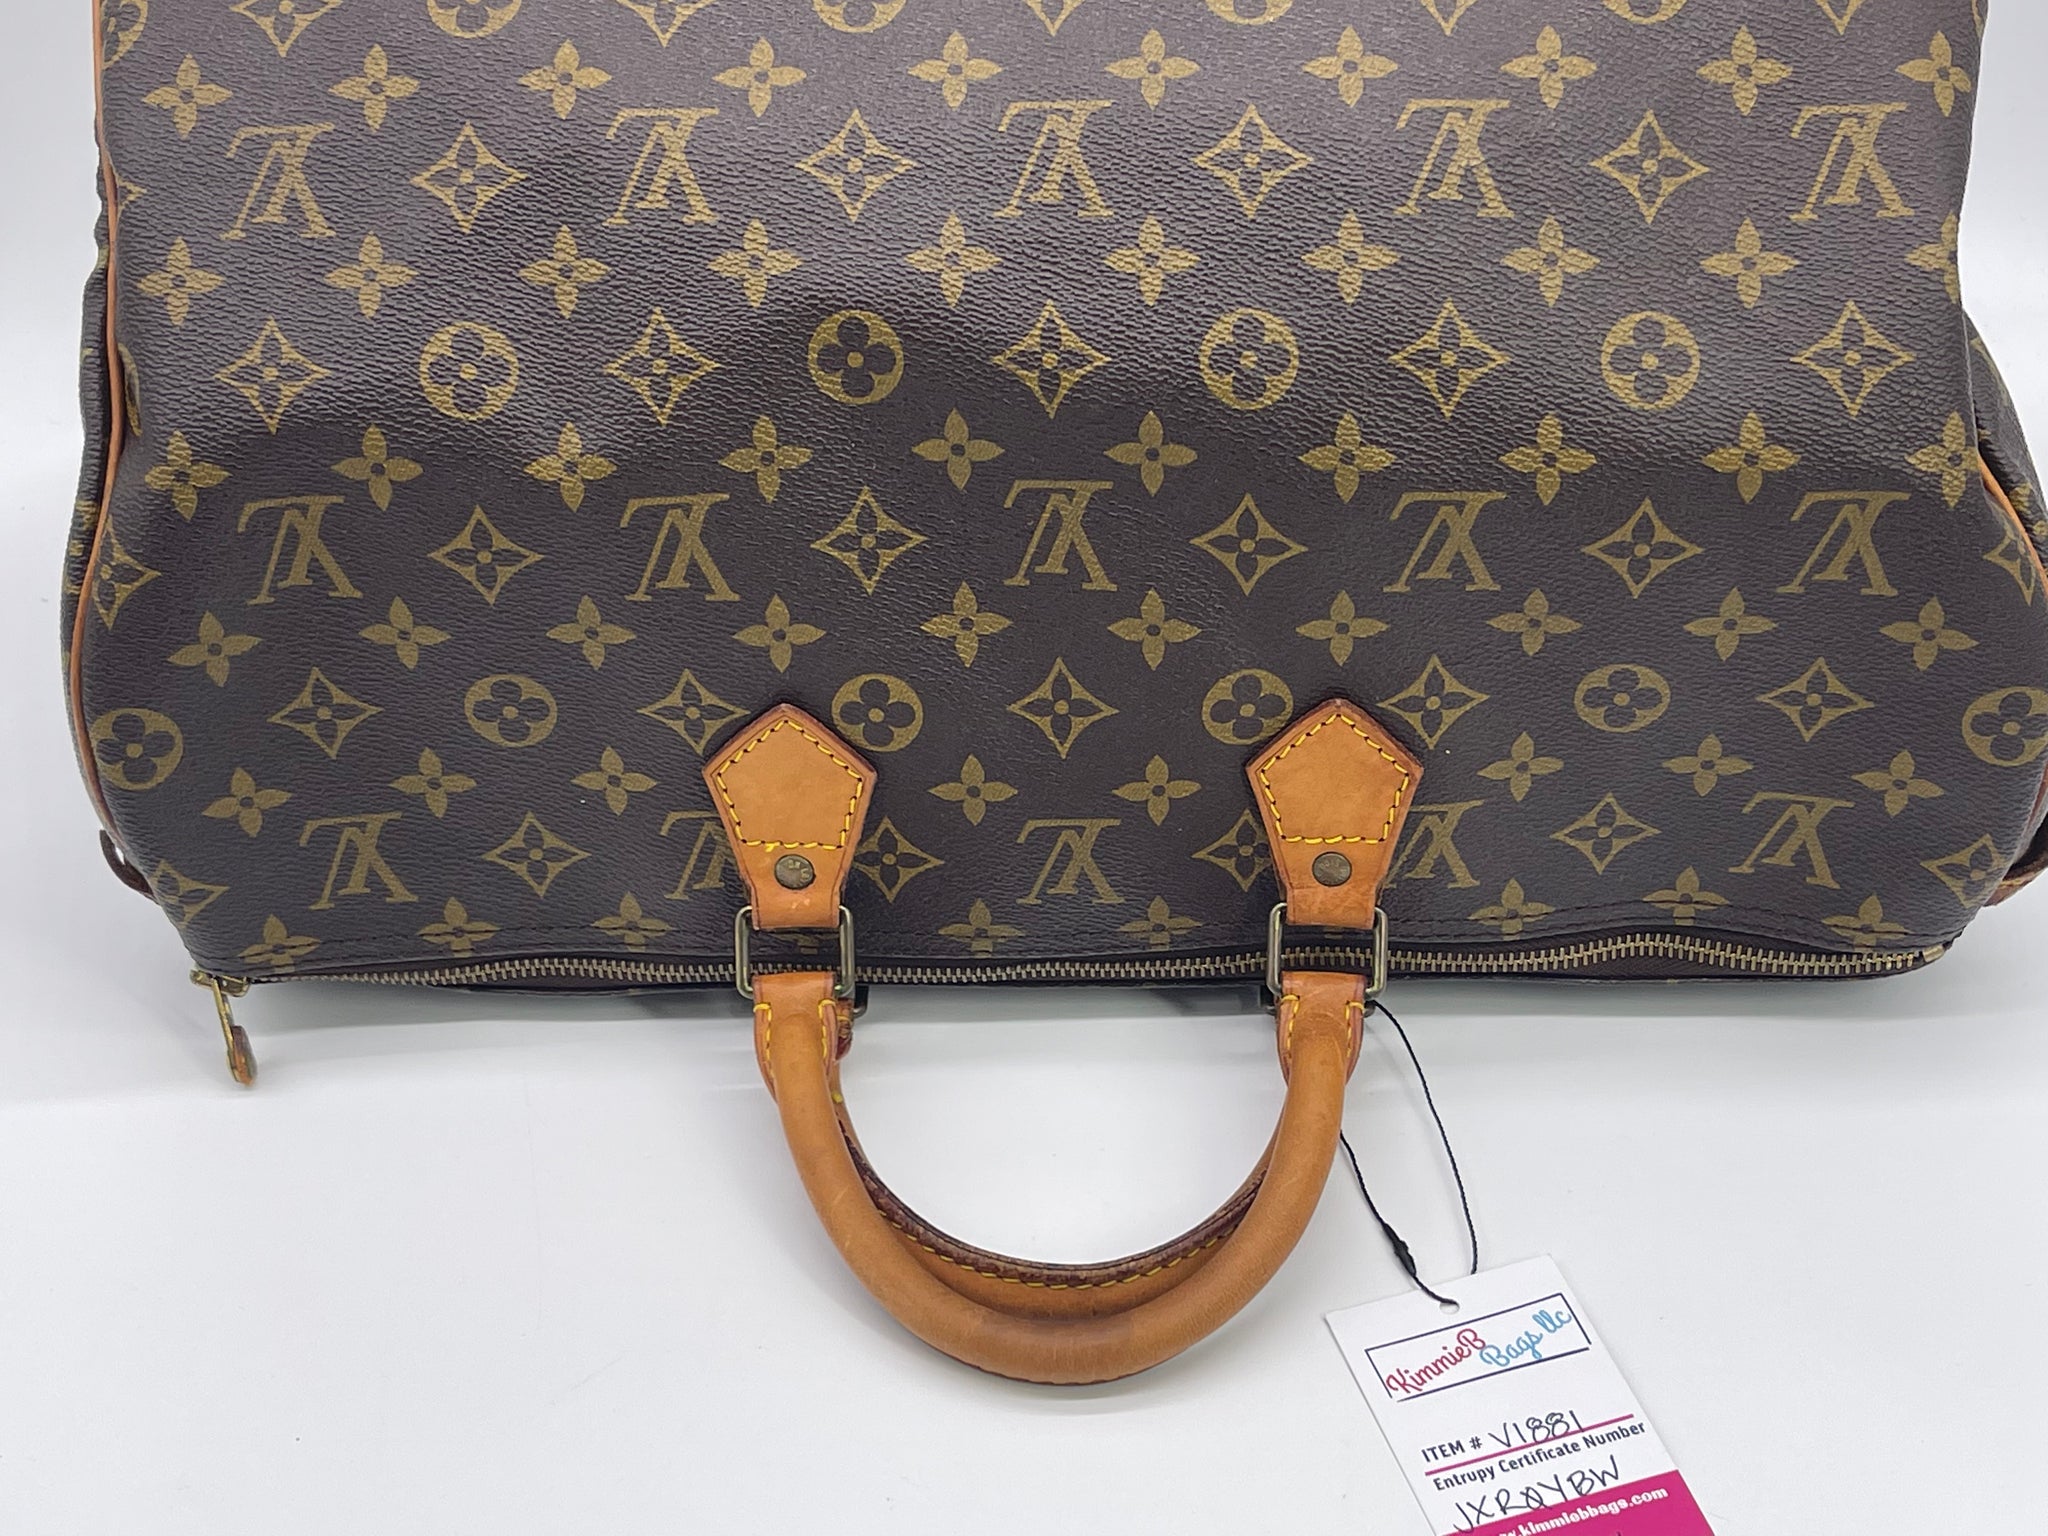 Buy Authentic Pre-owned Louis Vuitton Monogram Speedy 40 Duffle Hand Bag  Travel M41522 M41106 220001 from Japan - Buy authentic Plus exclusive items  from Japan